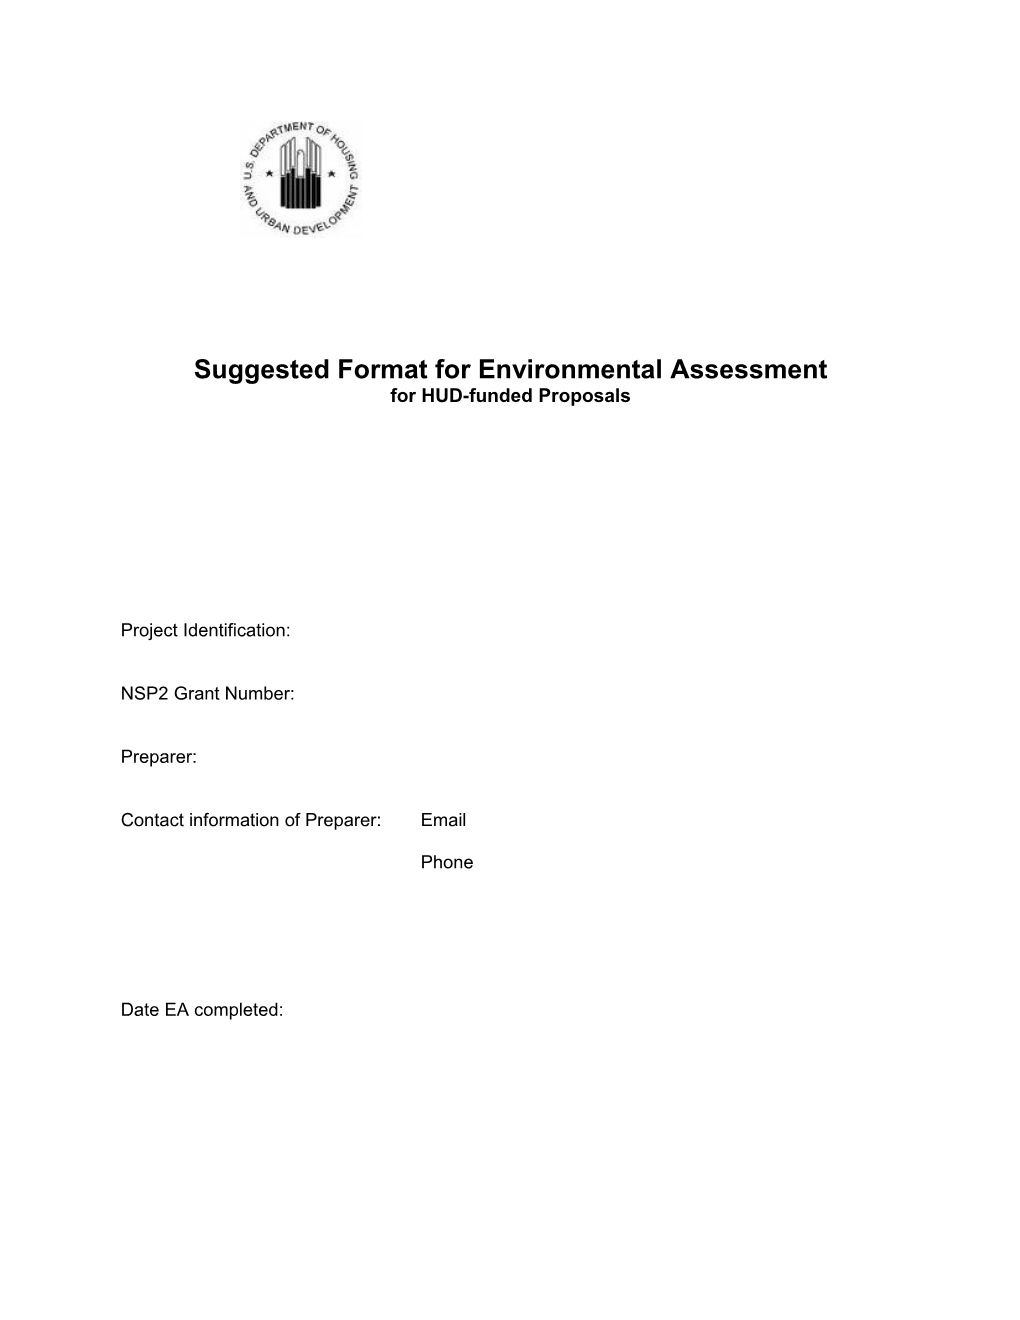 Suggested Format for Environmental Assessment for HUD-Funded Proposals